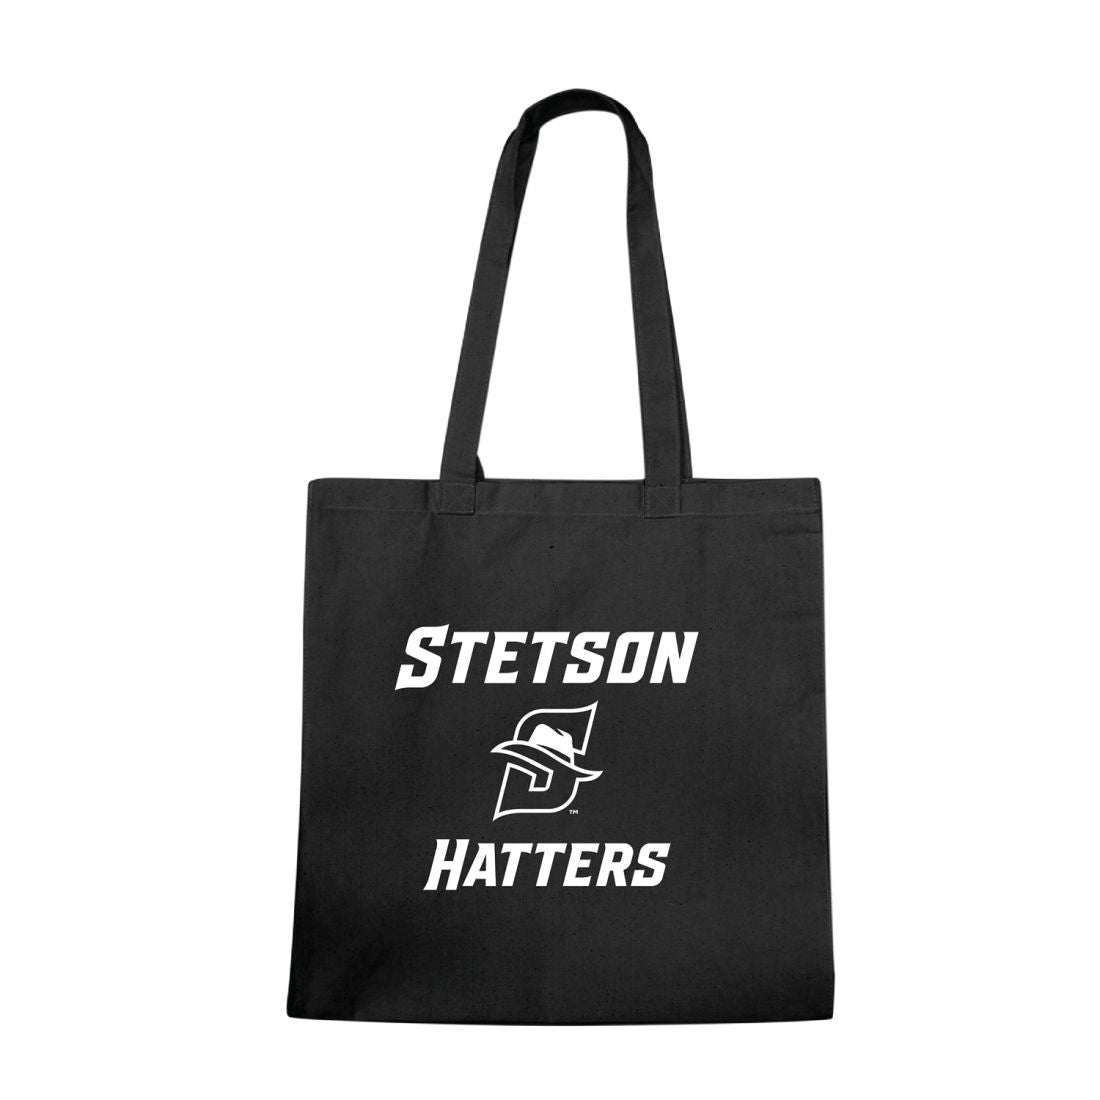 Stetson University Hatters Institutional Seal Tote Bag